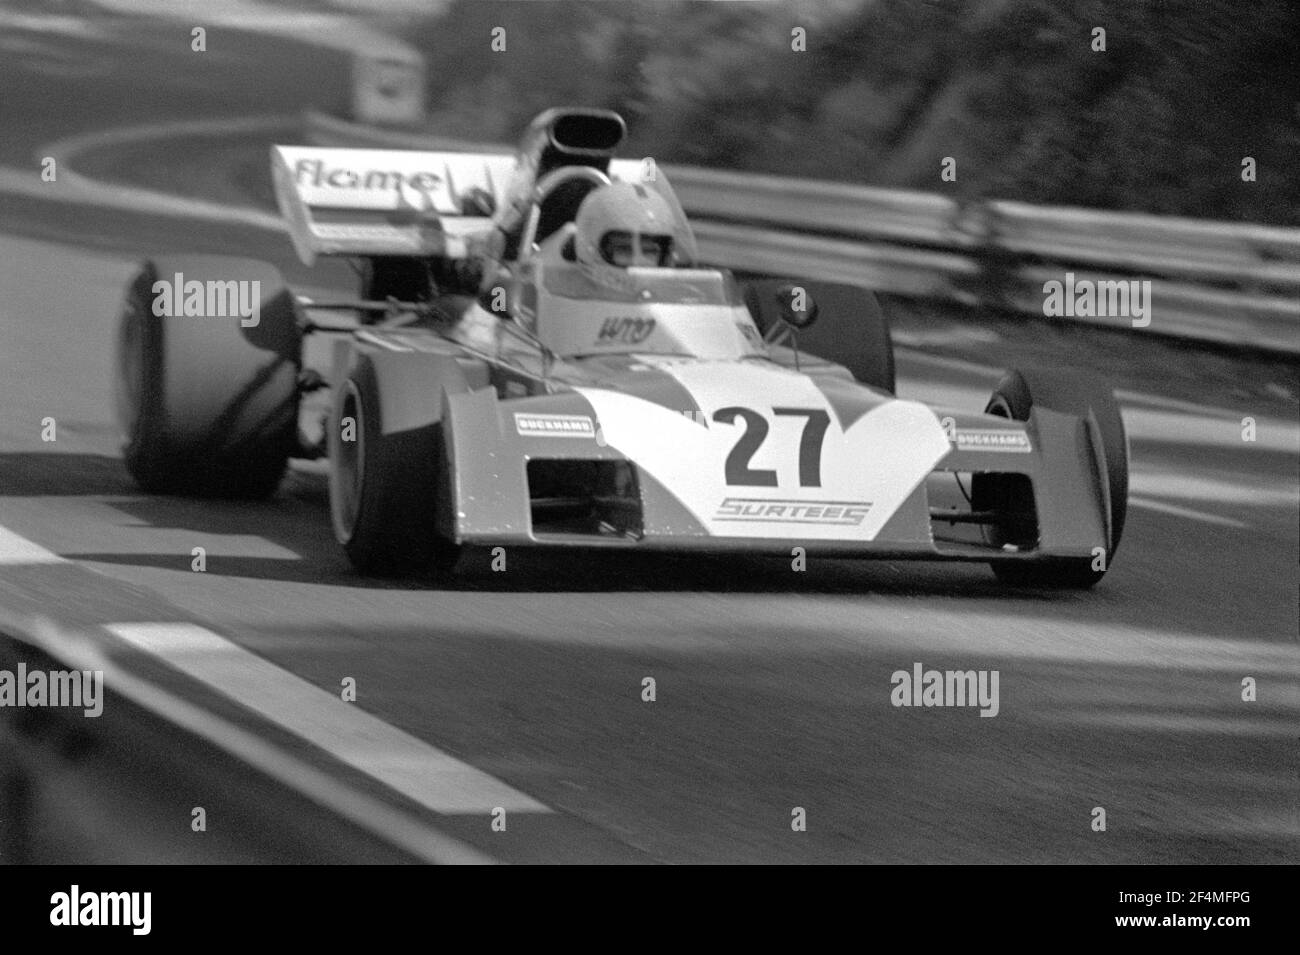 Tim SCHENKEN driving Surtees-Ford F1 car in full speed during 1972 Grand Prix de France, in Charade circuit near Clermont-Ferrand. Stock Photo